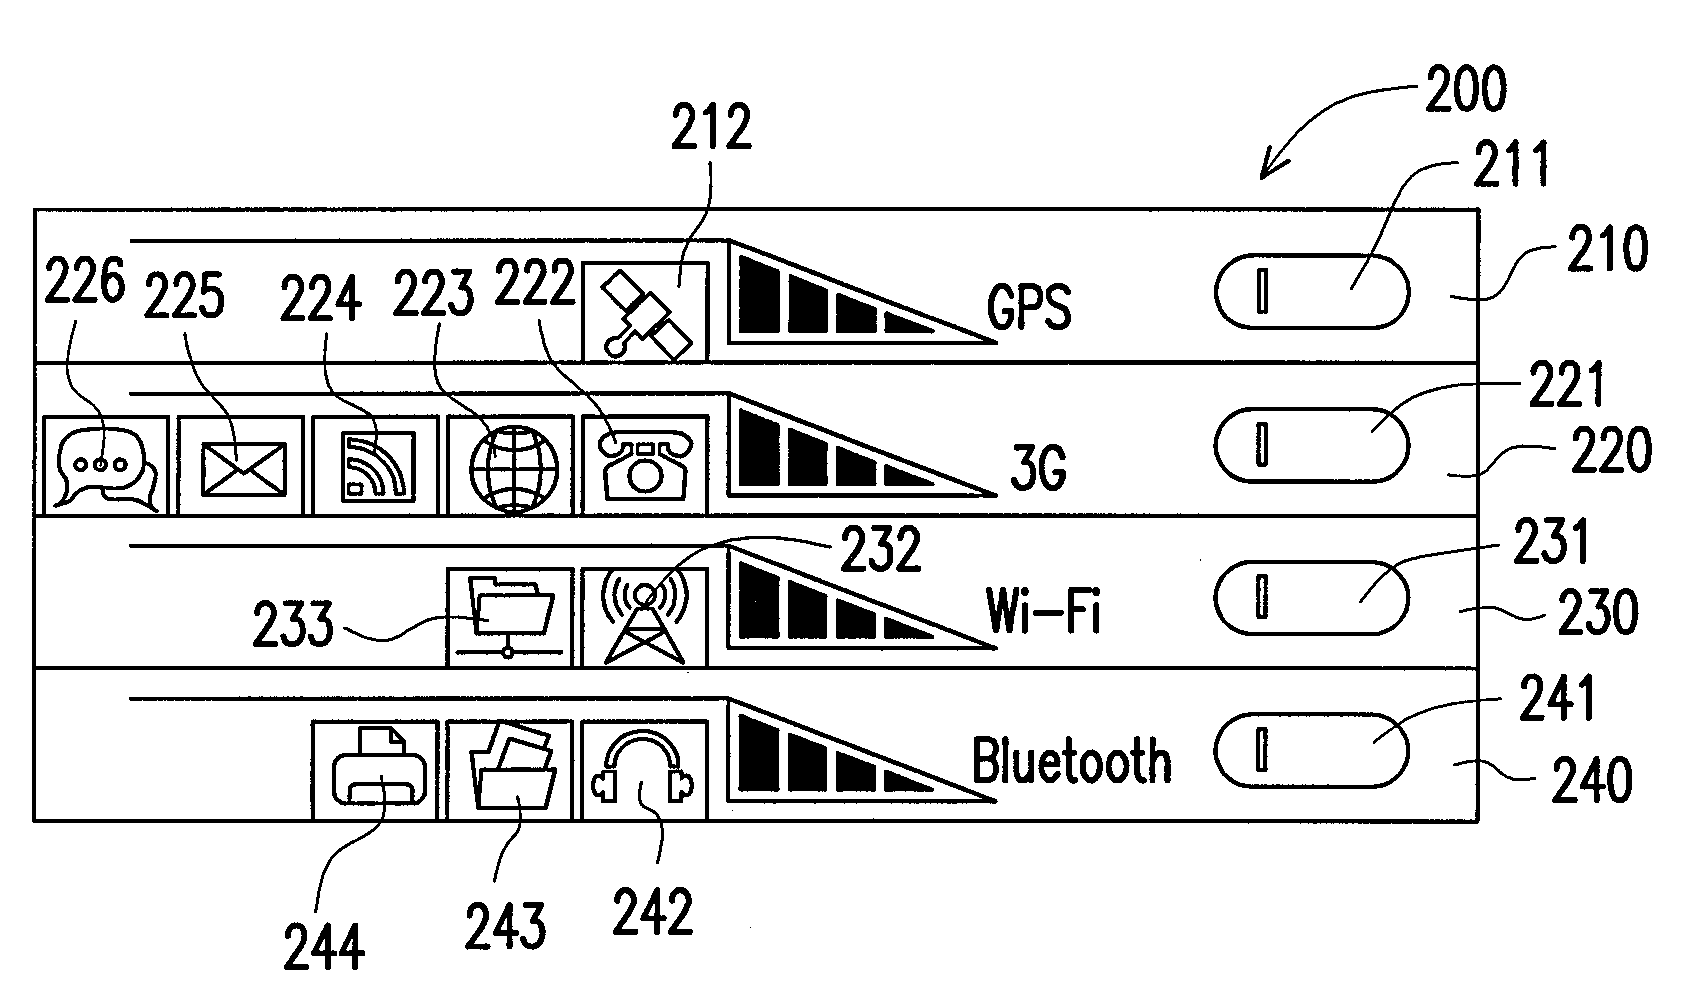 Method and user interface apparatus for managing functions of wireless communication components